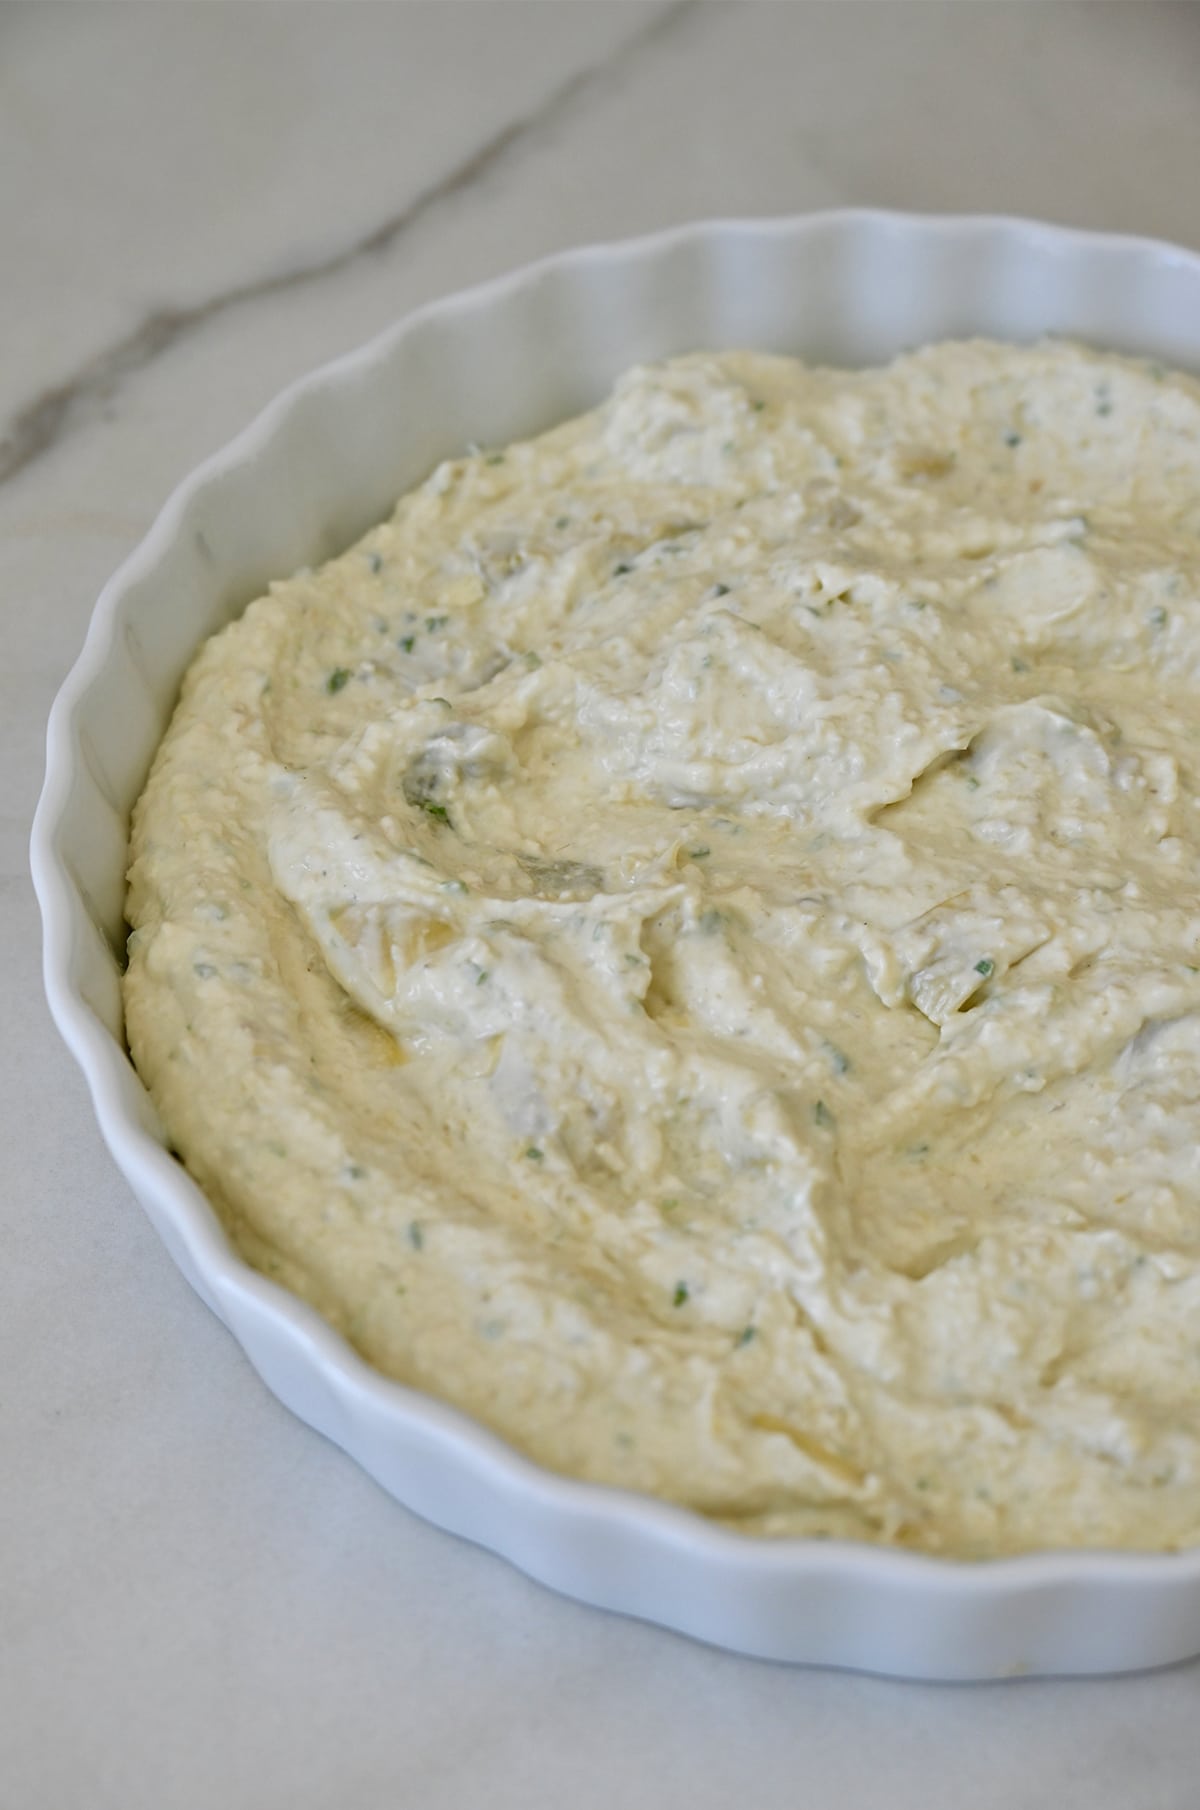 Unbaked artichoke dip in a shallow baking dish.